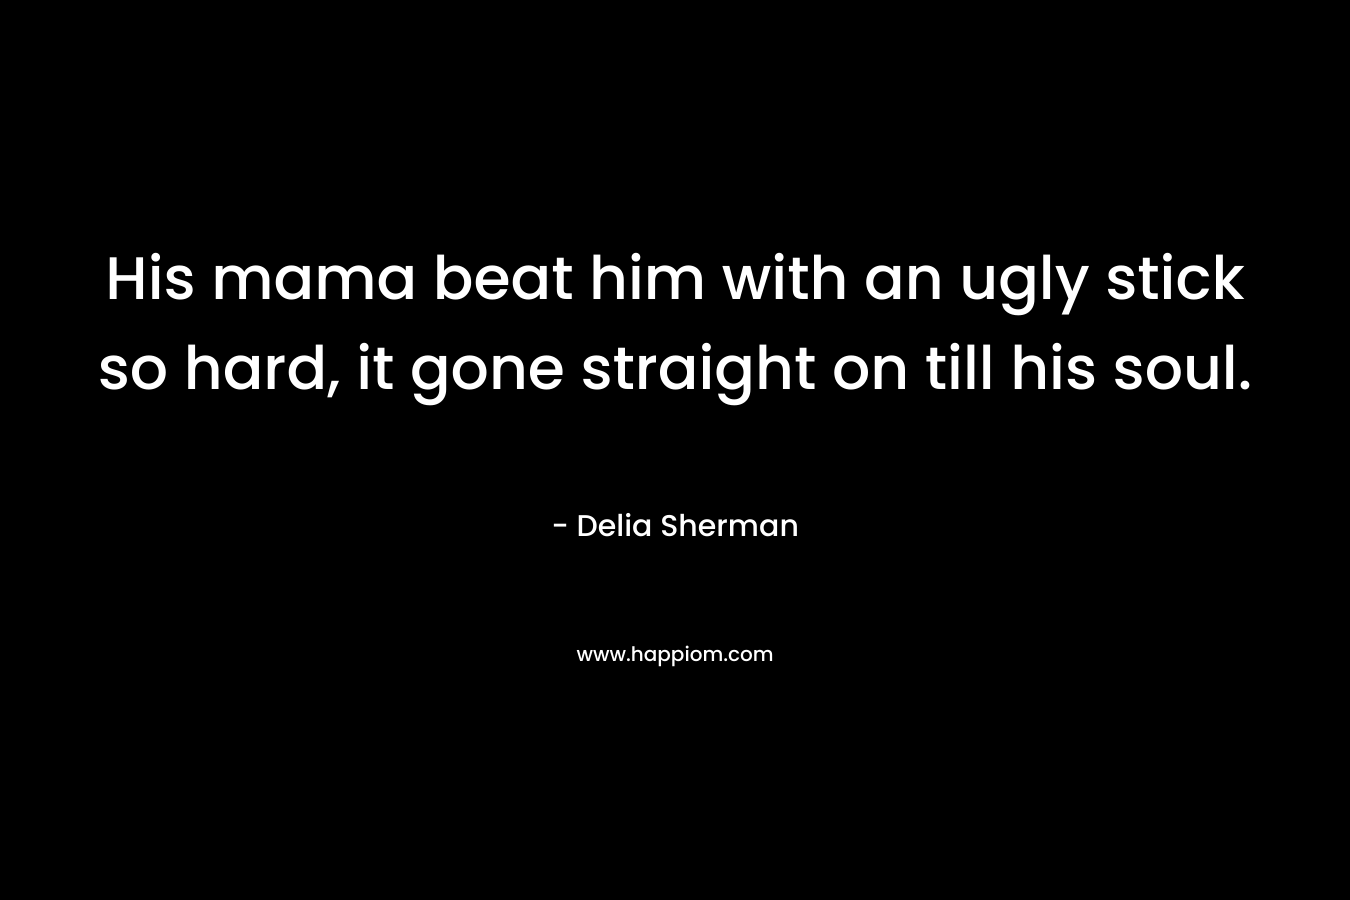 His mama beat him with an ugly stick so hard, it gone straight on till his soul. – Delia Sherman